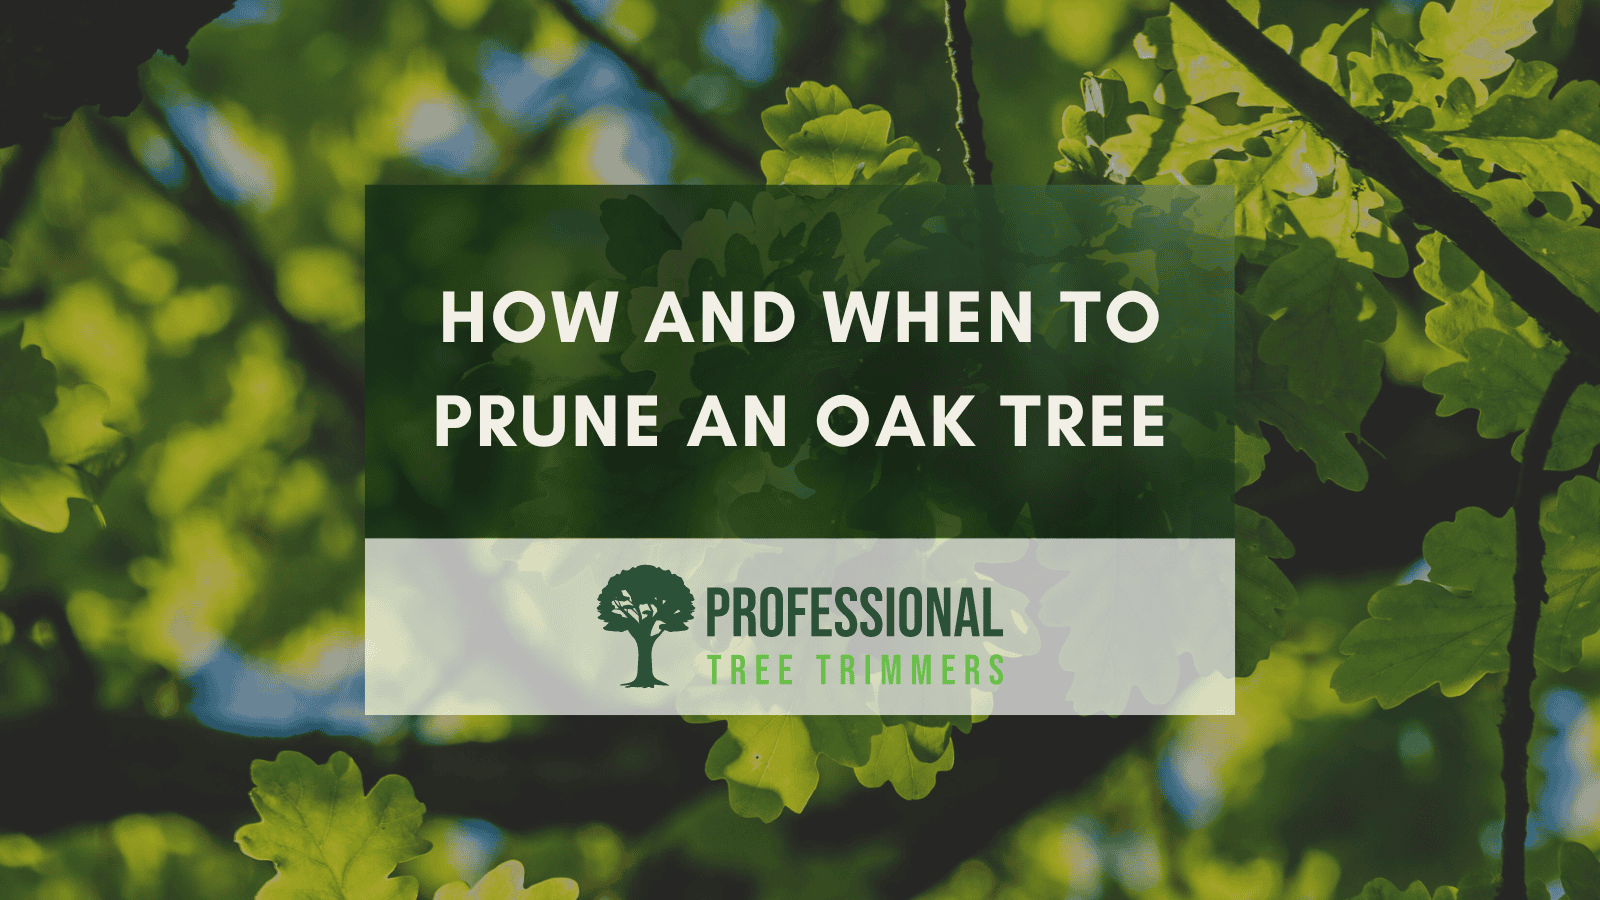 How and when to prune an oak tree